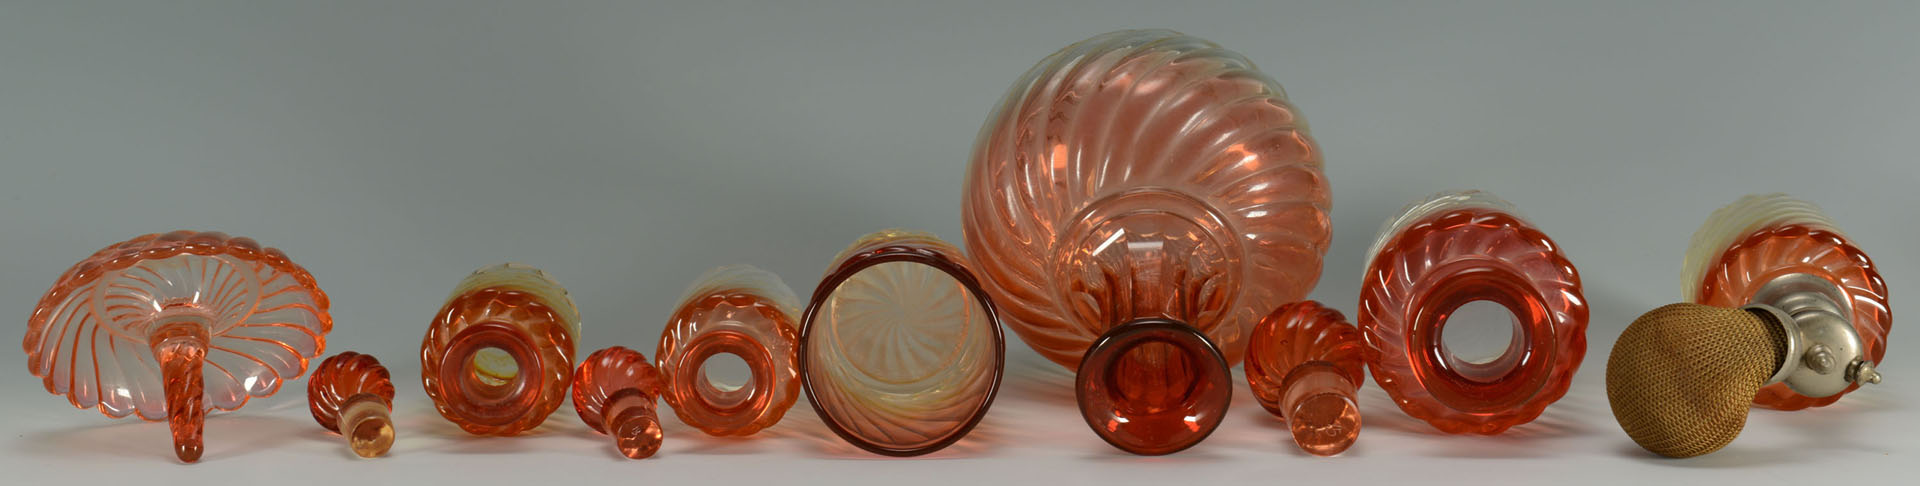 Lot 366: Lot of Baccarat Amberina Glass items, total 11